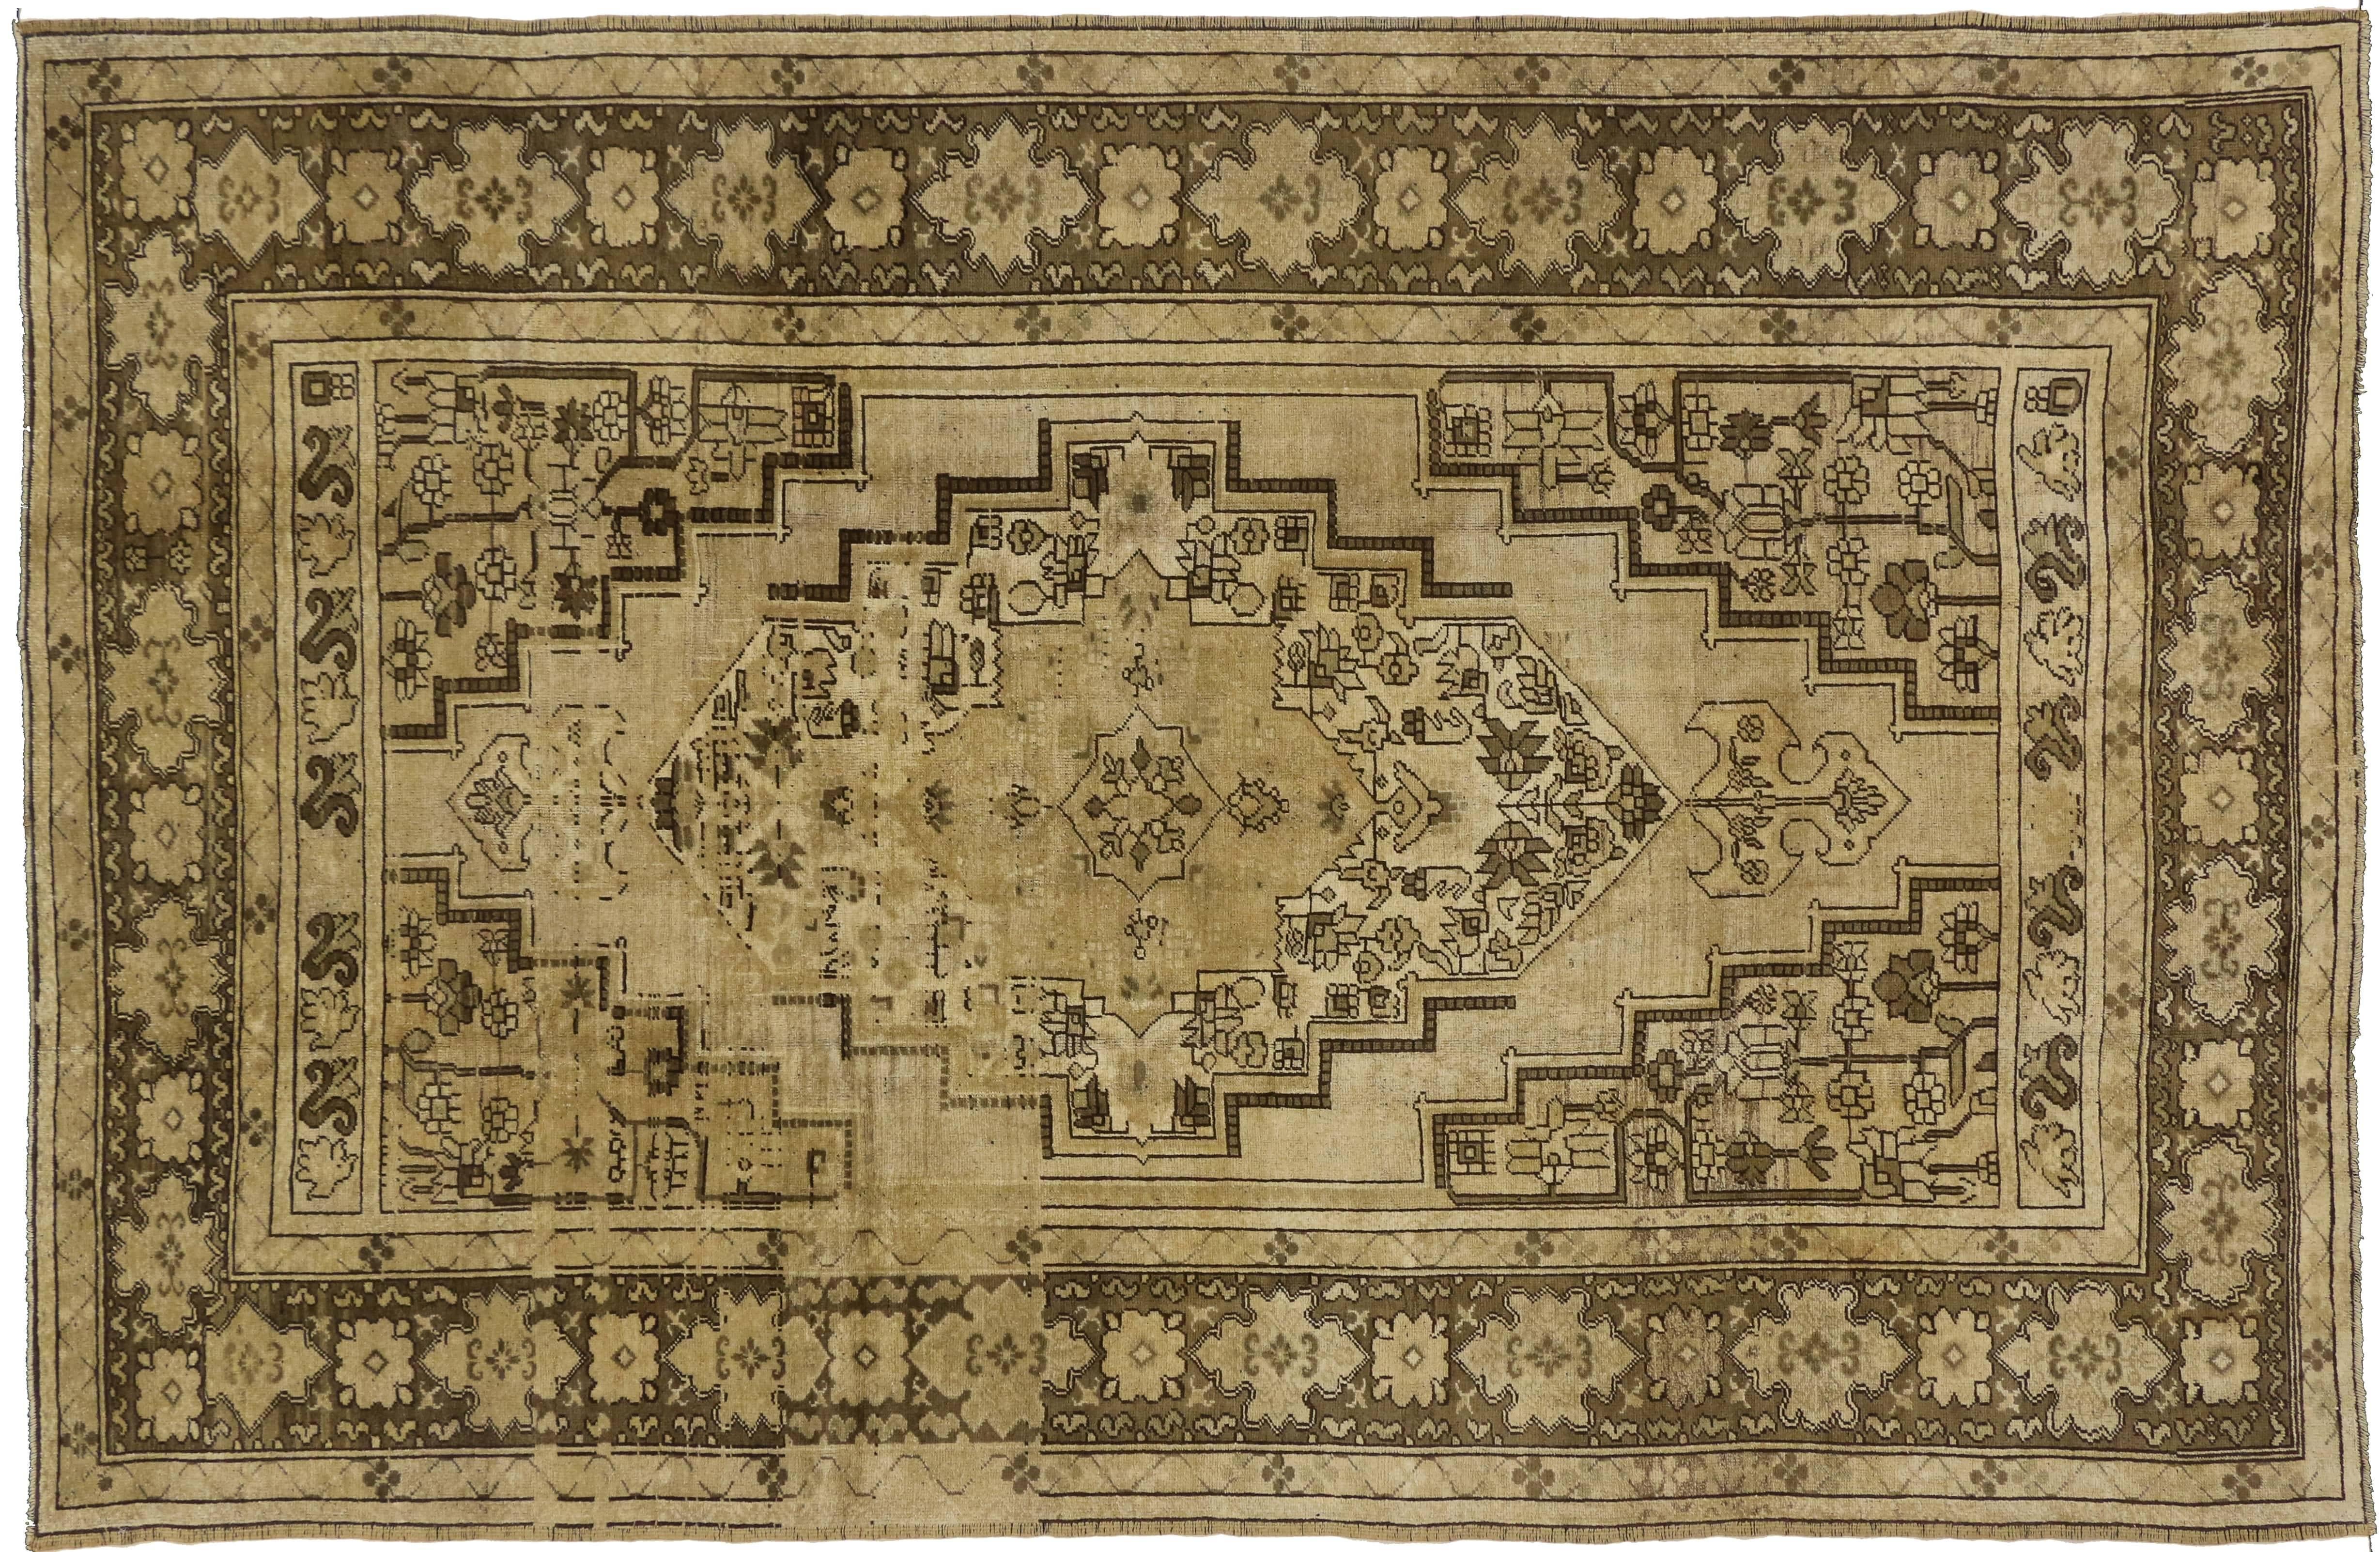 74073, vintage Turkish Oushak rug with traditional style and warm earth-tones. This hand-knotted wool vintage Turkish Oushak rug features a central angular stair-step medallion filled with stylized vines blooming with palmettes. The medallion floats